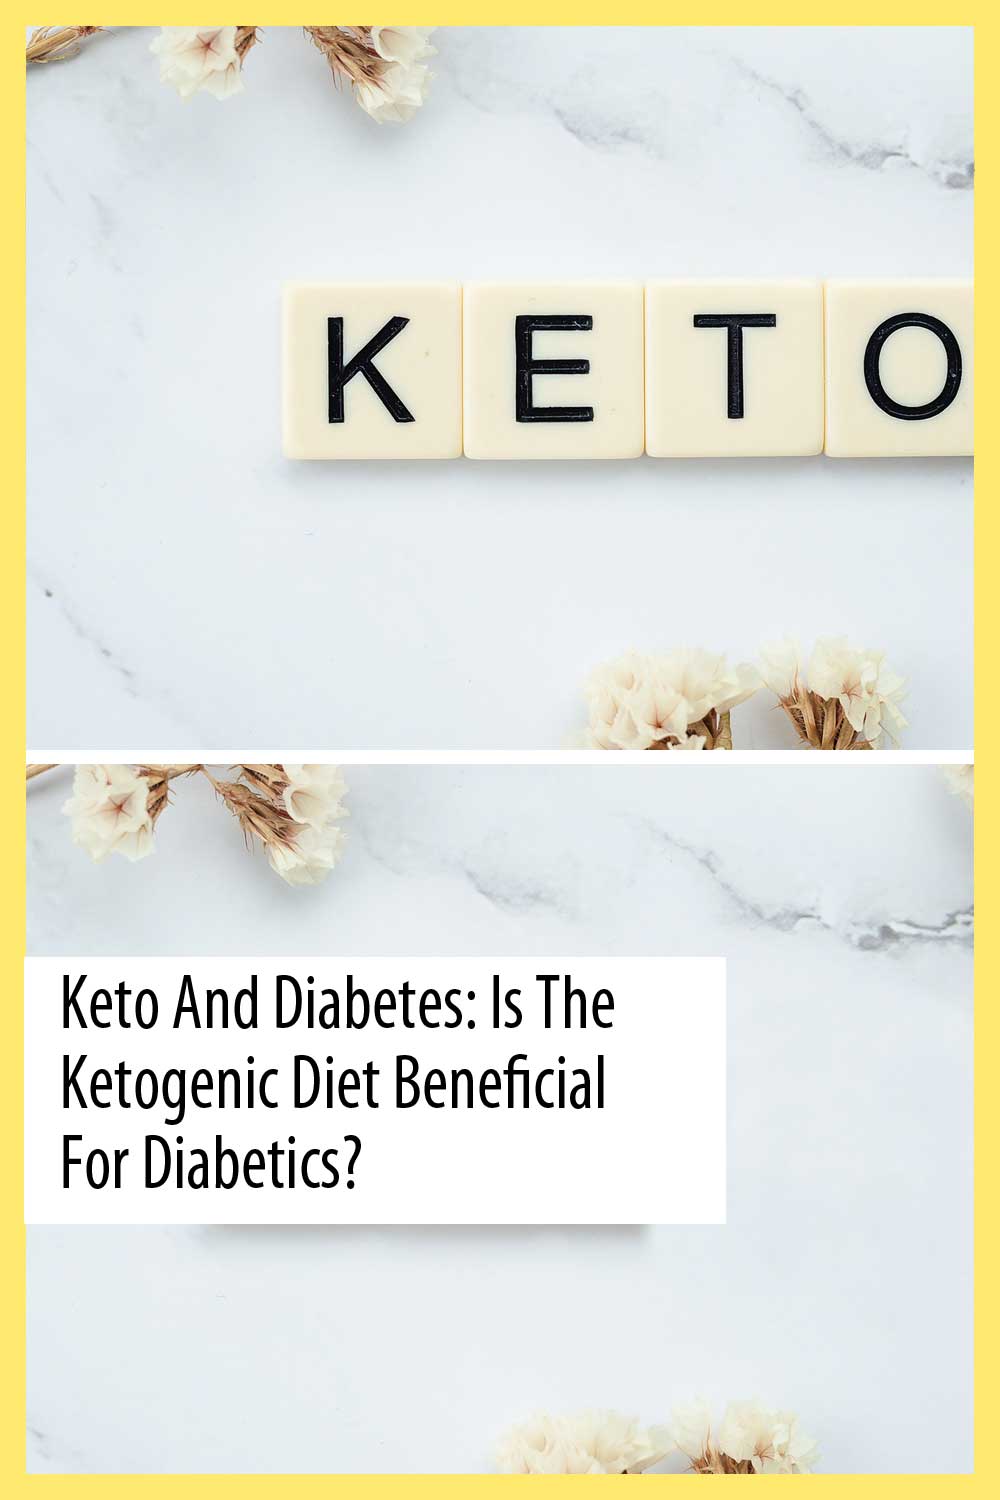 Keto and Diabetes: Is the Ketogenic Diet Beneficial for Diabetics?